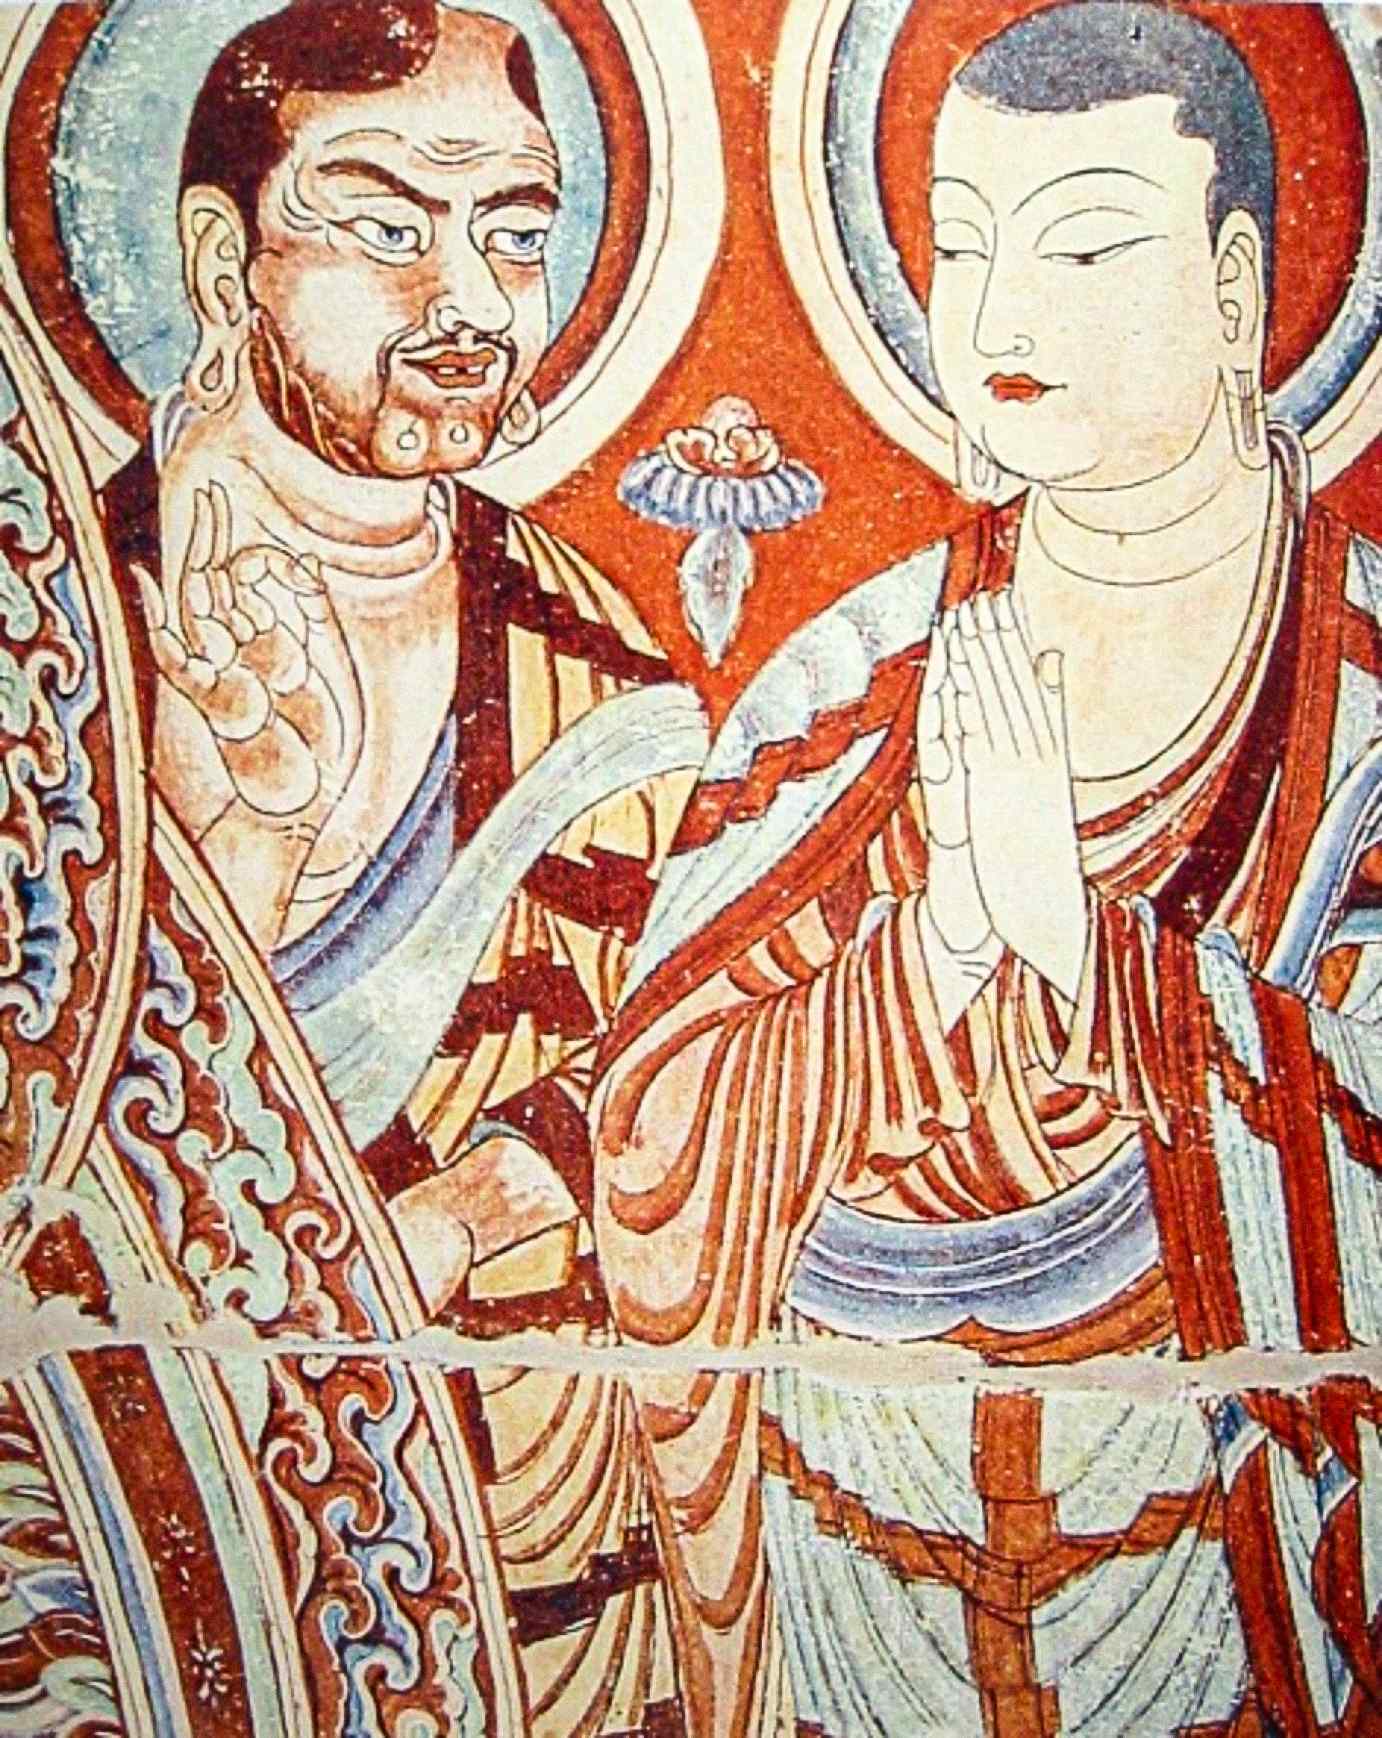 A Caucasian Central Asian monk, possibly an Indo-European Sogdian or Tocharian, teaching an East Asian monk, perhaps a Turkic Uyghur or Chinese, on a 9th-century AD fresco from the Bezeklik Thousand Buddha Caves near Turfan, Xinjiang, China.